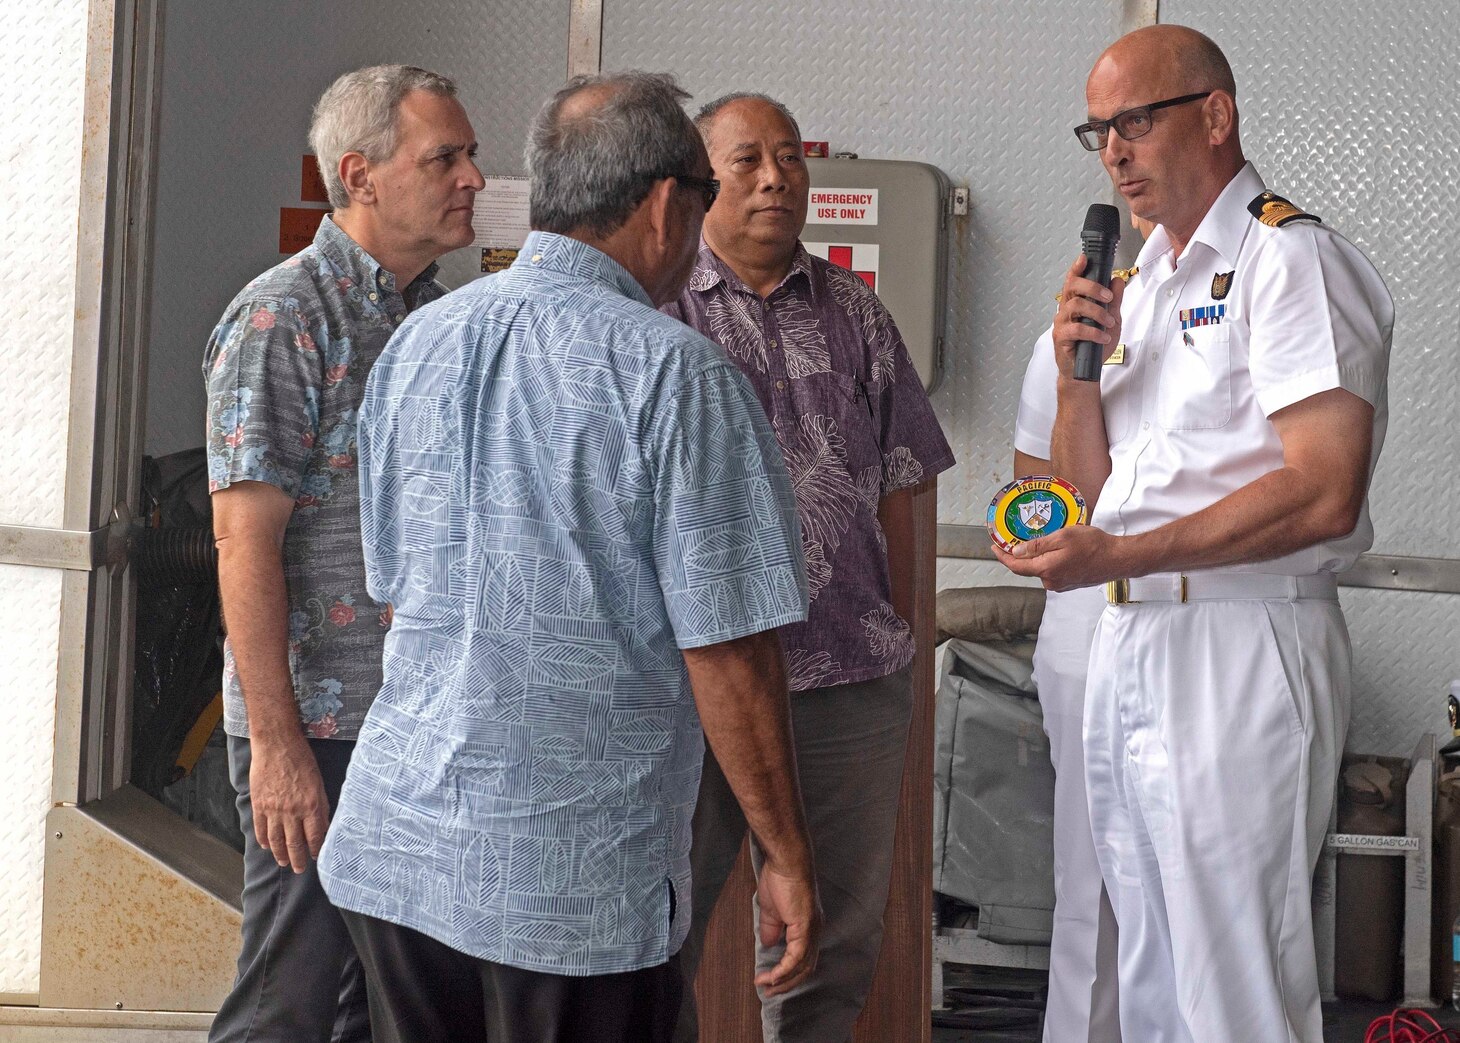 CHUUK, Federated States of Micronesia (April 25, 2019) Royal Navy Capt. Paddy Allen, director of mission, presents His Excellency President Peter Christian, president of the Federated States of Micronesia, with a Pacific Partnership medallion at the closing ceremony aboard the Military Sealift Command expeditionary fast transport ship USNS Brunswick (T-EPF 6), strengthening strategic partnerships during Pacific Partnership 2019. Pacific Partnership, now in its 14th iteration, is the largest annual multinational humanitarian assistance and disaster relief preparedness mission conducted in the Indo-Pacific.